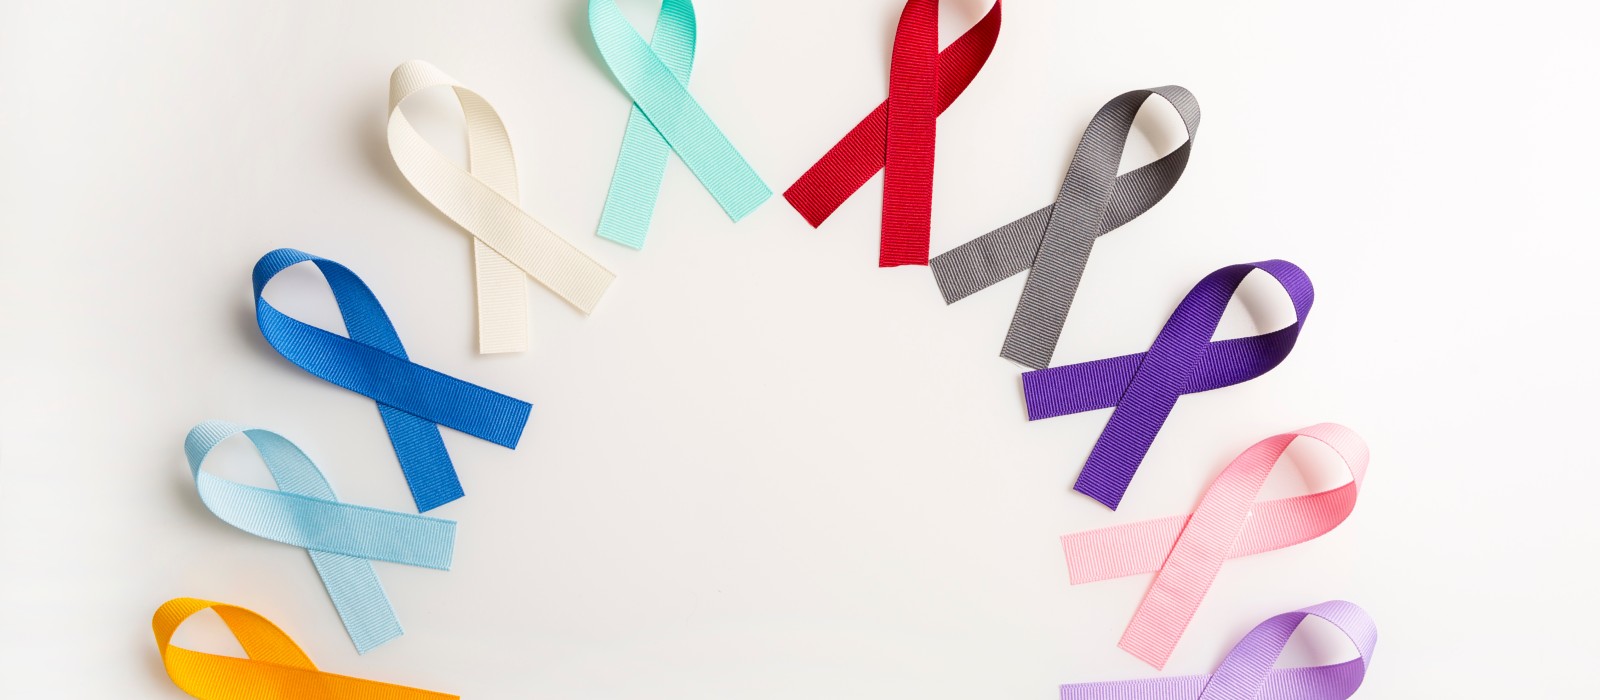 What Are the Most Common Types of Cancers? Do They Differ Between Men and Women?